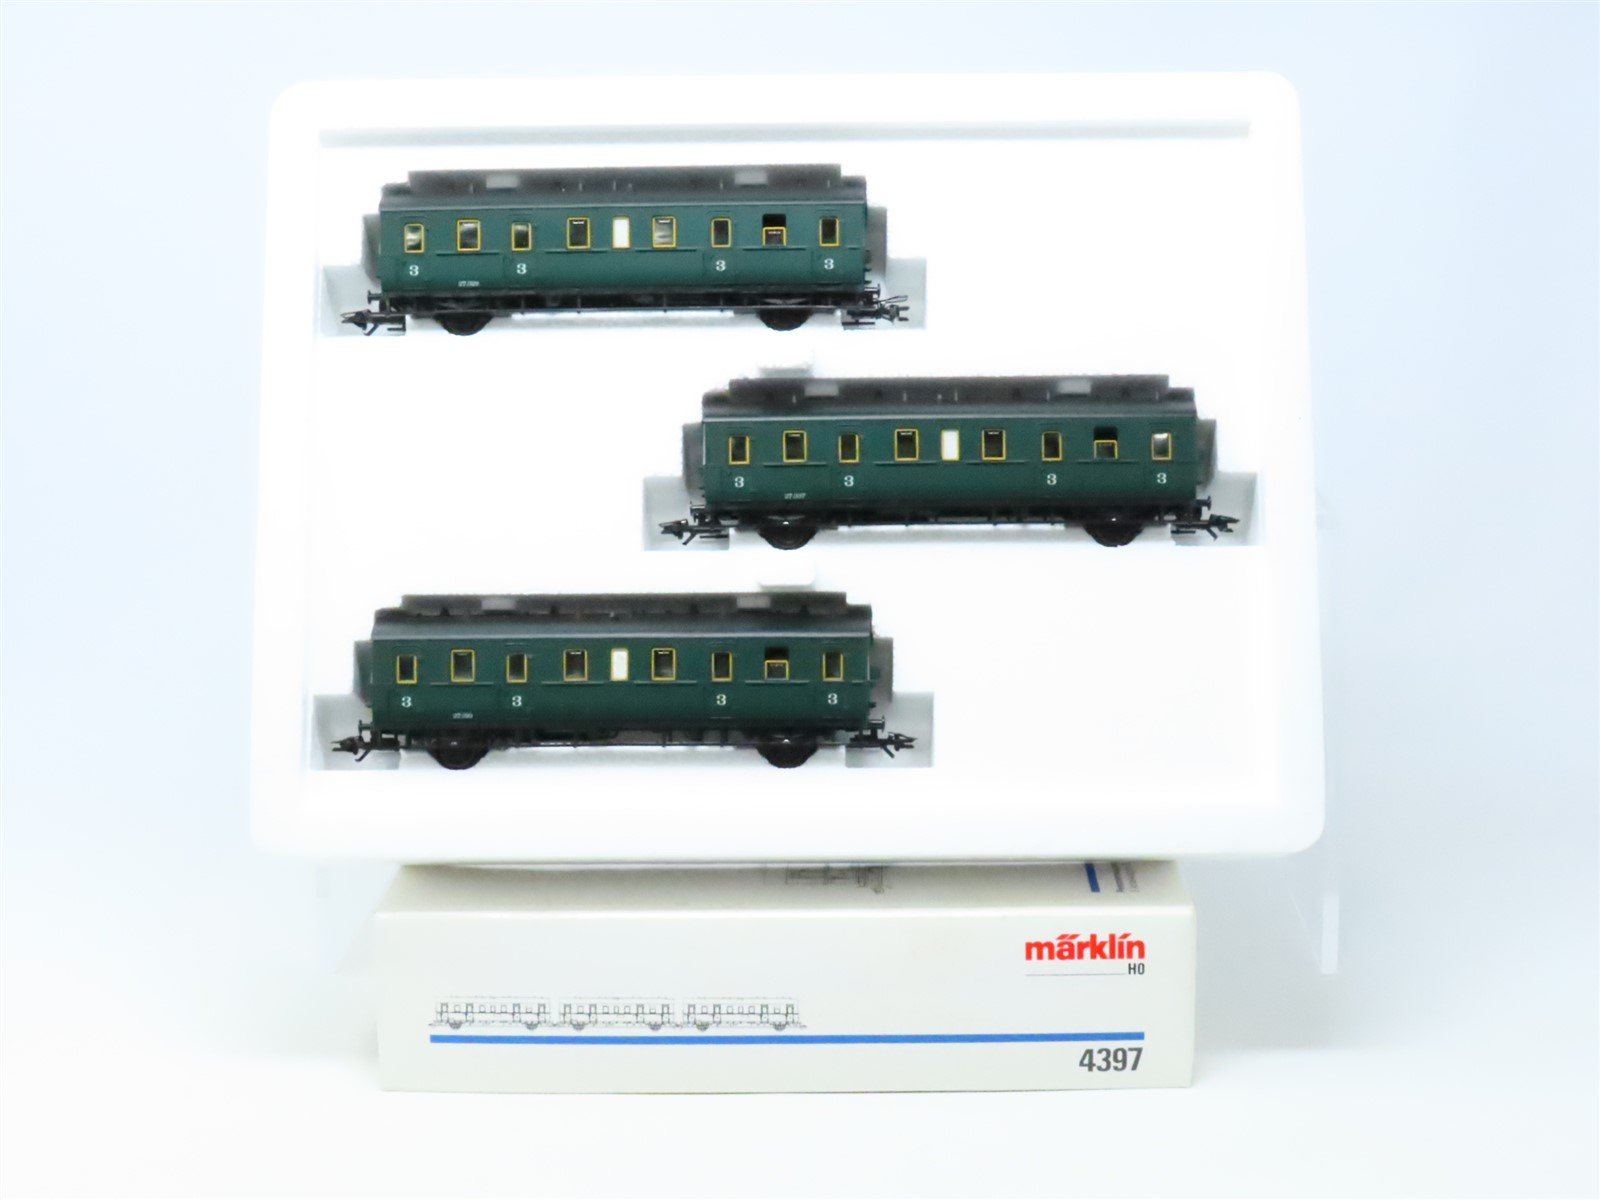 Marklin 392431 - Exclusive Orient Express Set from the 1920s &1930s